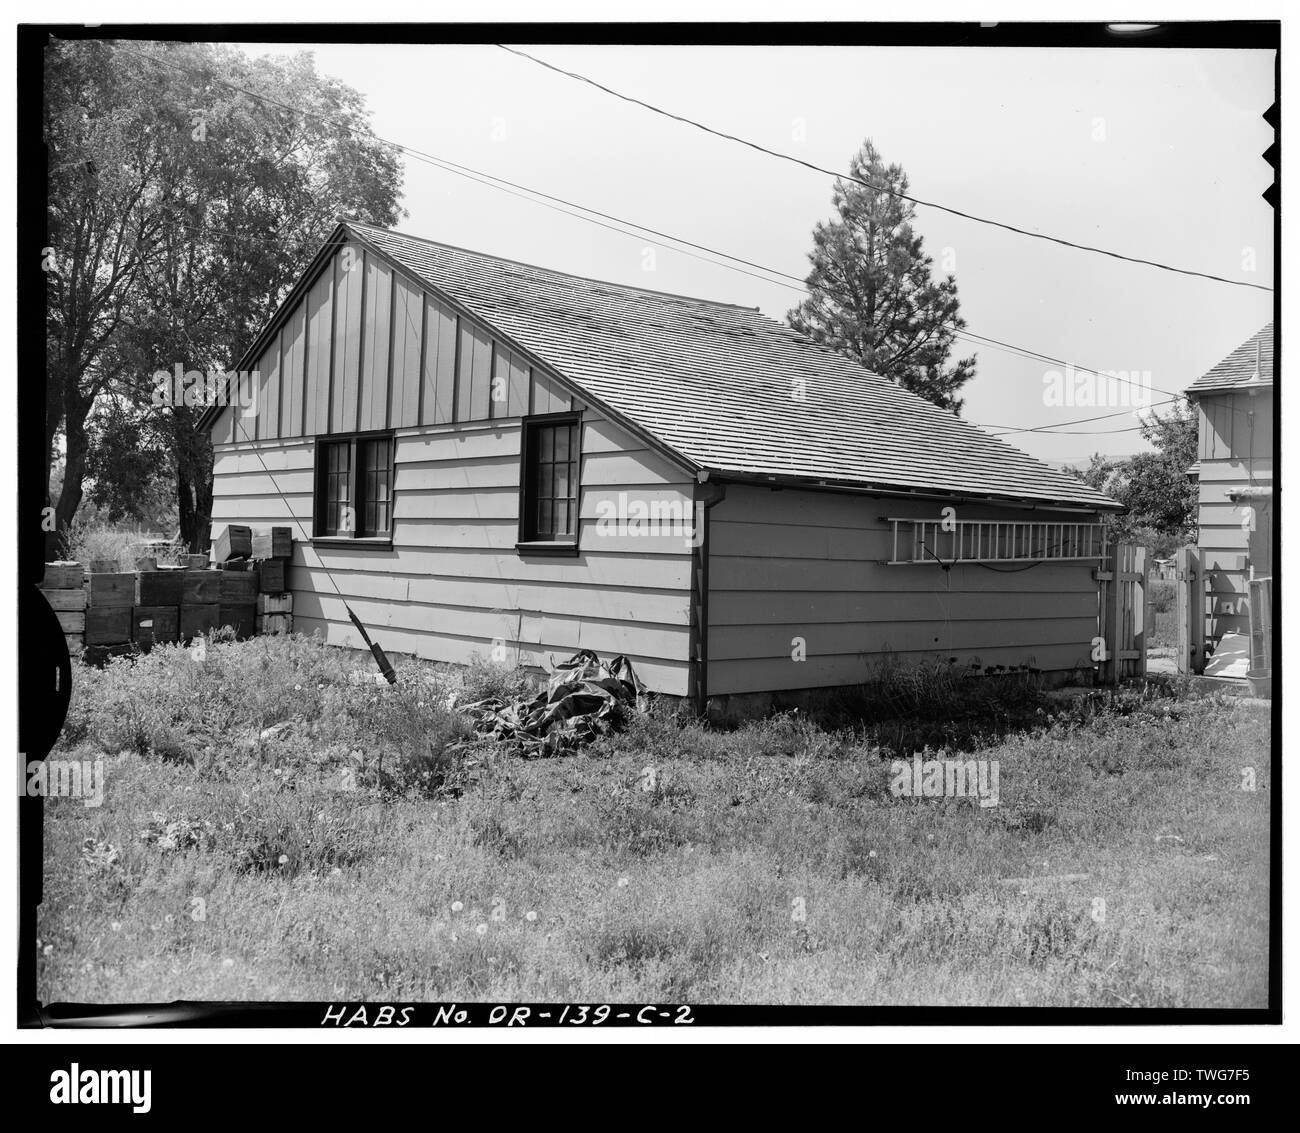 RANGERS RESIDENCE, GARAGE, NORTHWEST BACK AND NORTHEAST SIDE, LOOKING SOUTH - Union Ranger District Compound, Garage-Rangers Residence, Fronting State Highway 203, at West edge of Union, Union, Union County, OR Stock Photo